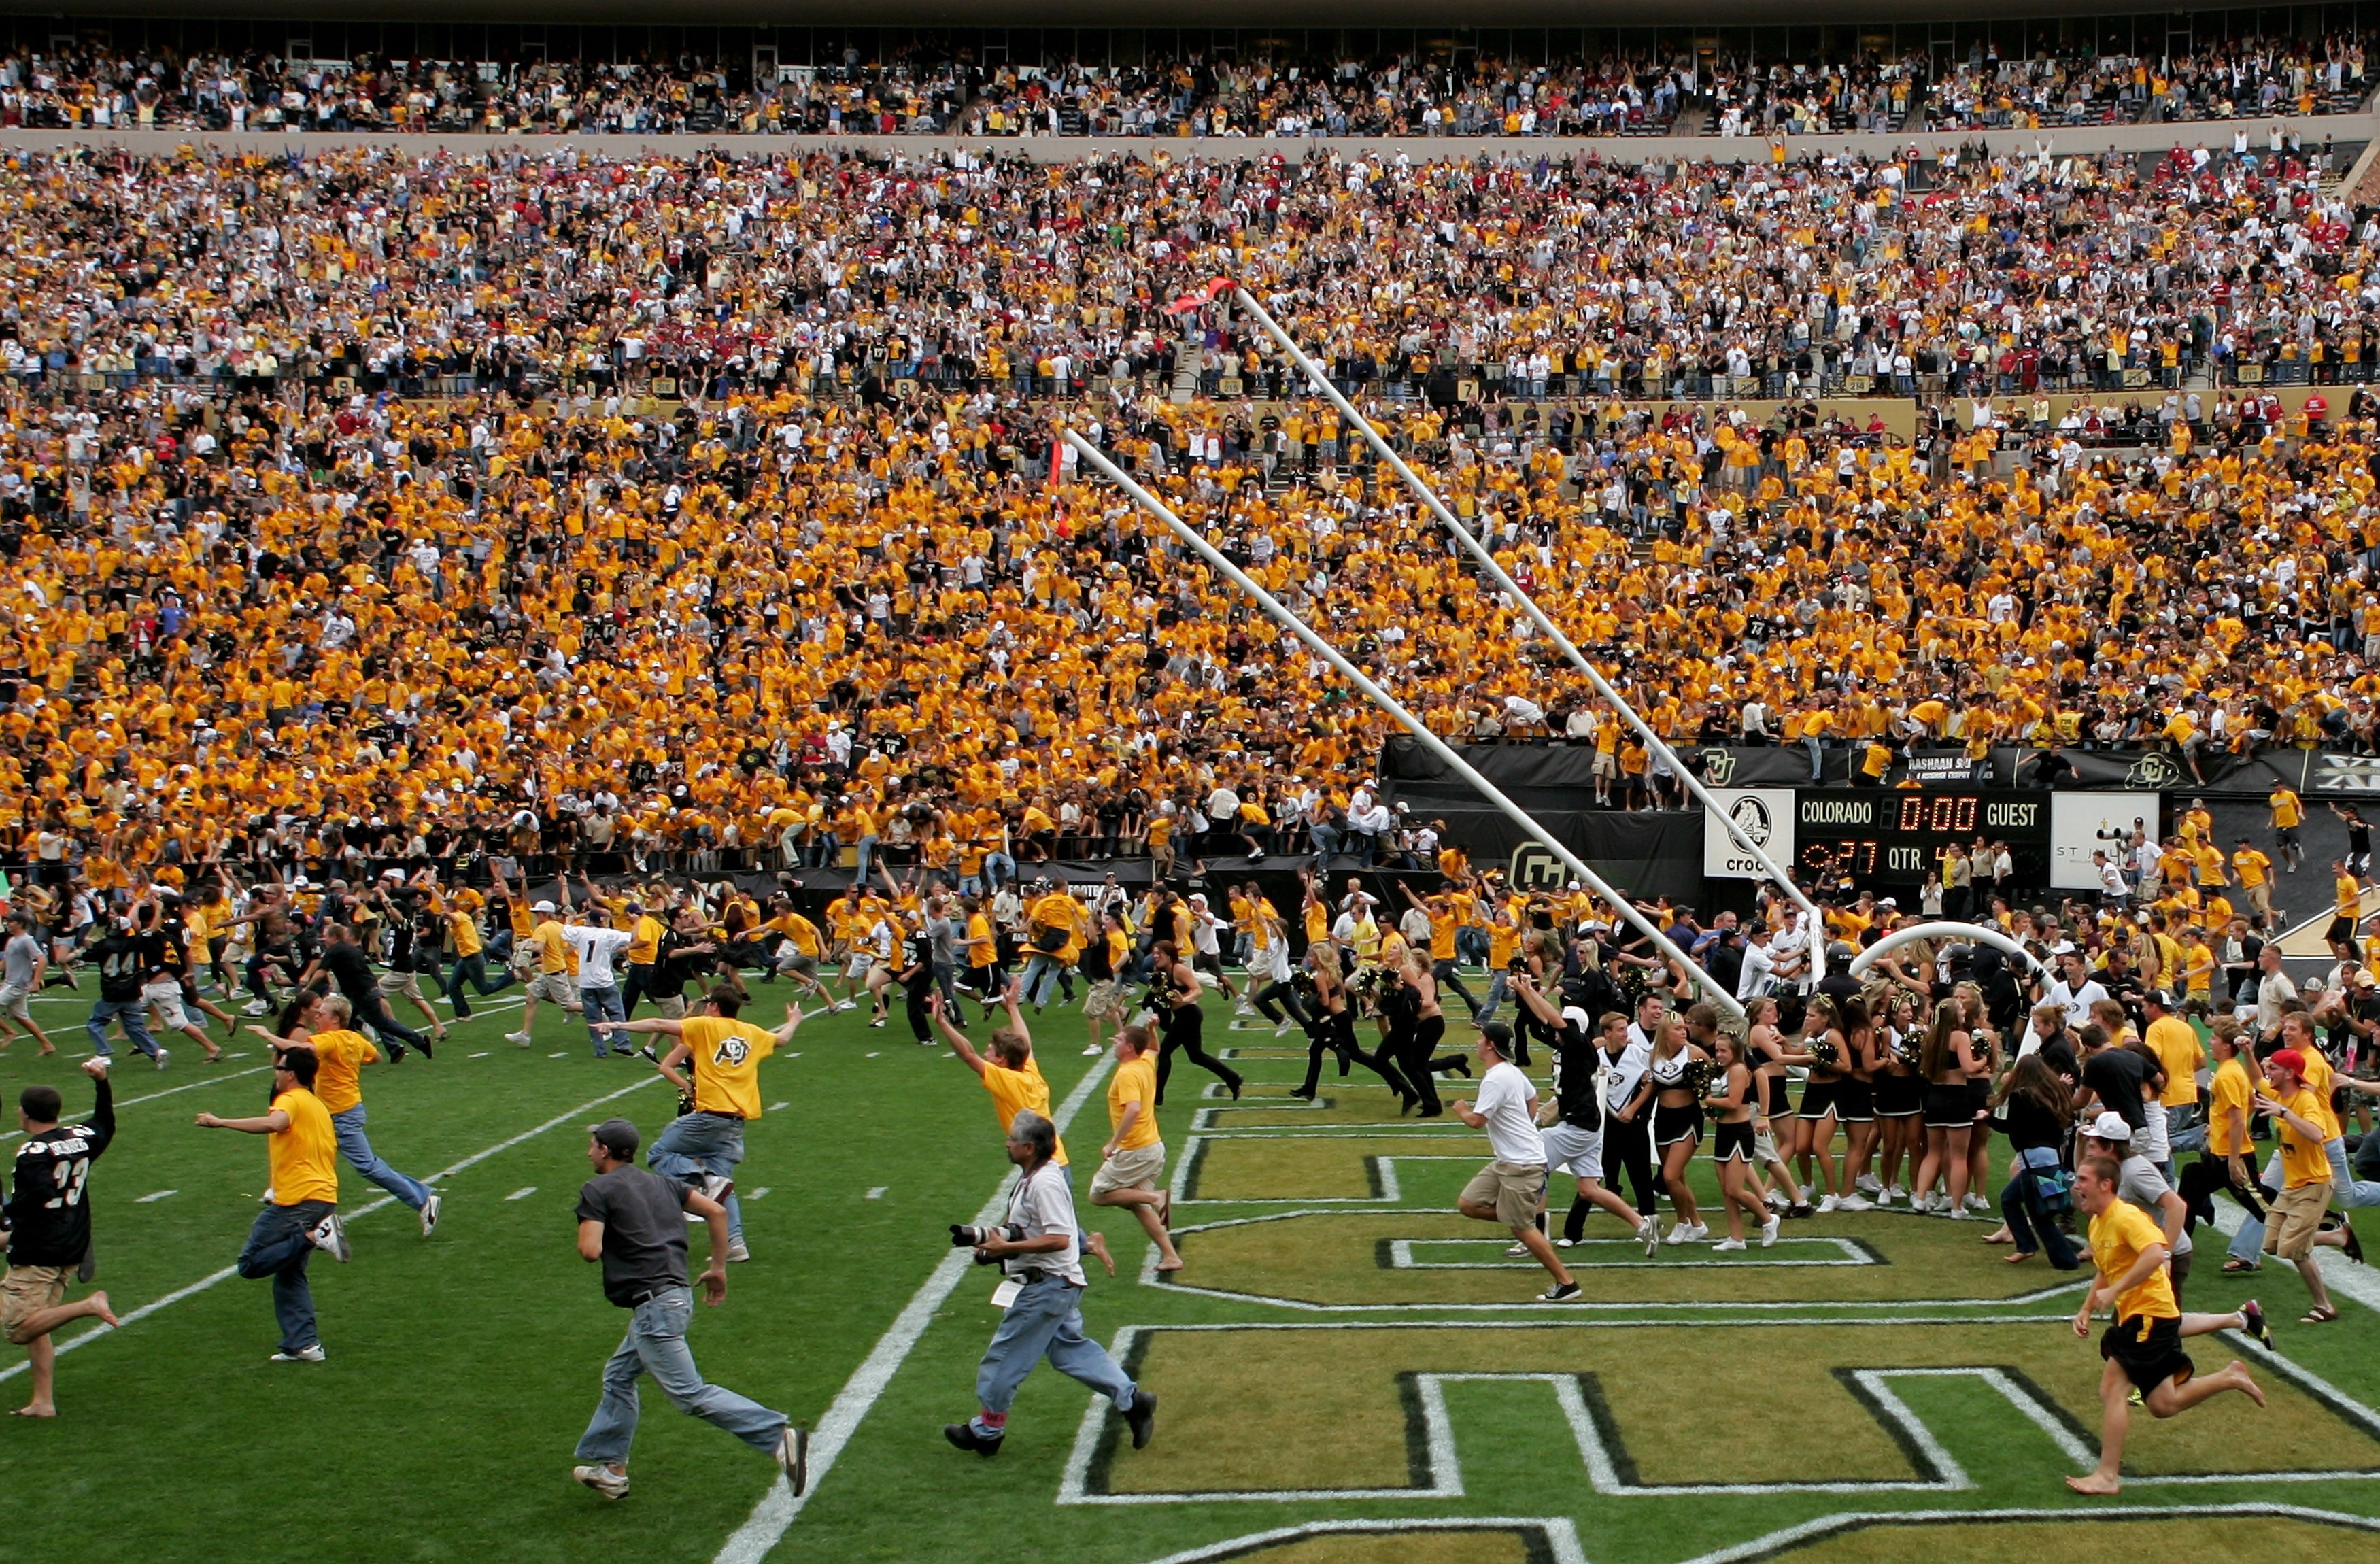 BOULDER, CO - SEPTEMBER 29:  The goal posts are lowered as the fans swarm the field after place kicker Kevin Eberhart of the Colorado Buffaloes kicked the game winning field goal as time expires against the Oklahoma Sooners at Folsom Field on September 29